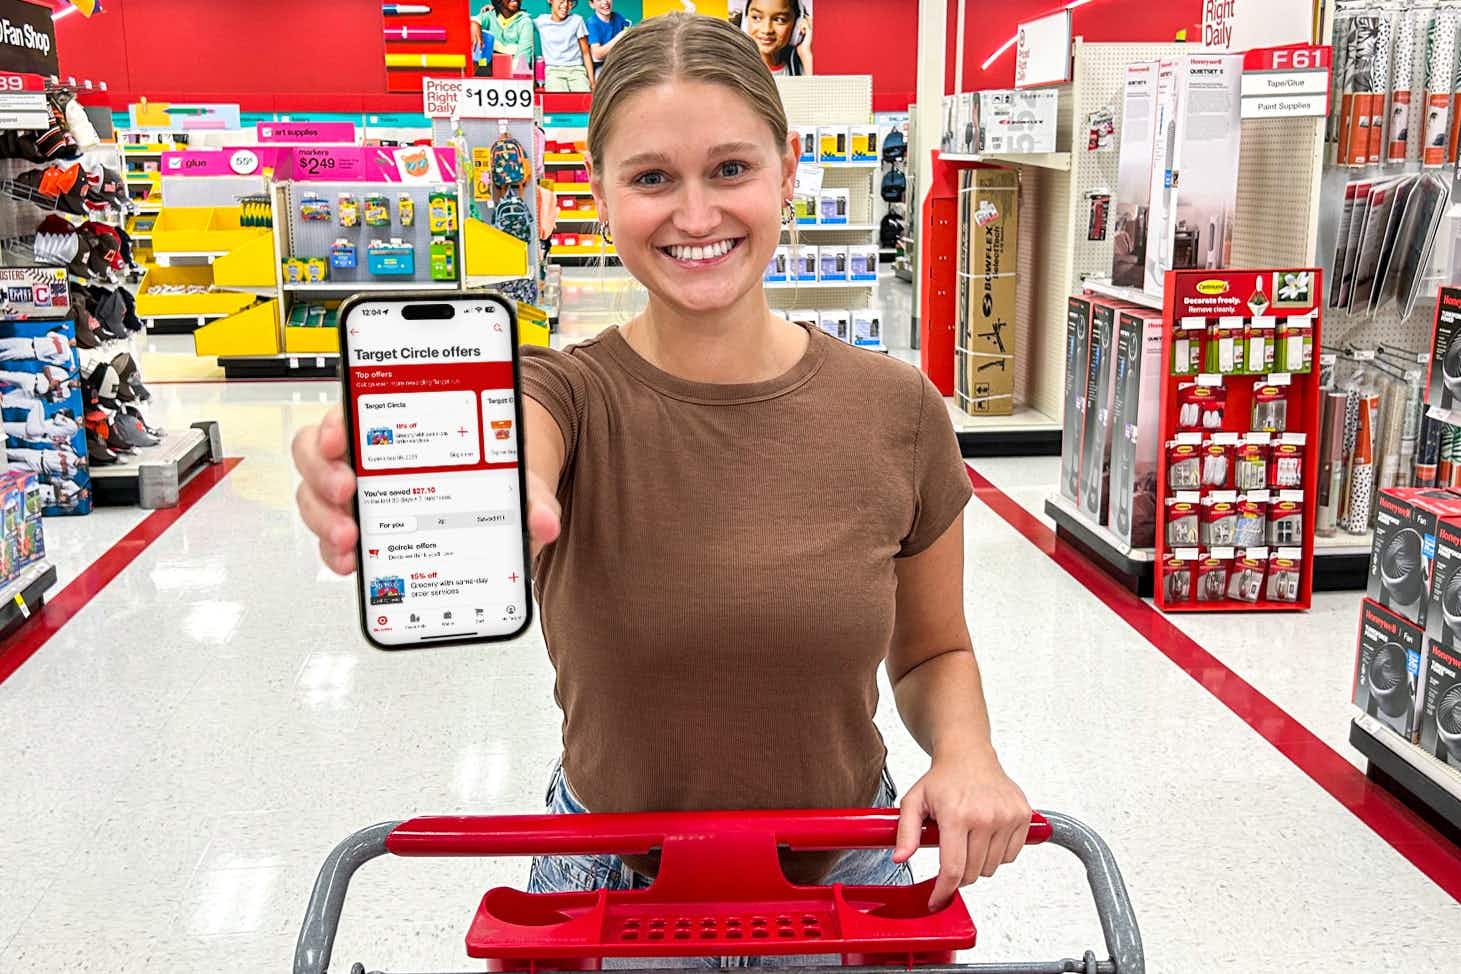 target-circle-offers-cart-model-phone-kcl-feature